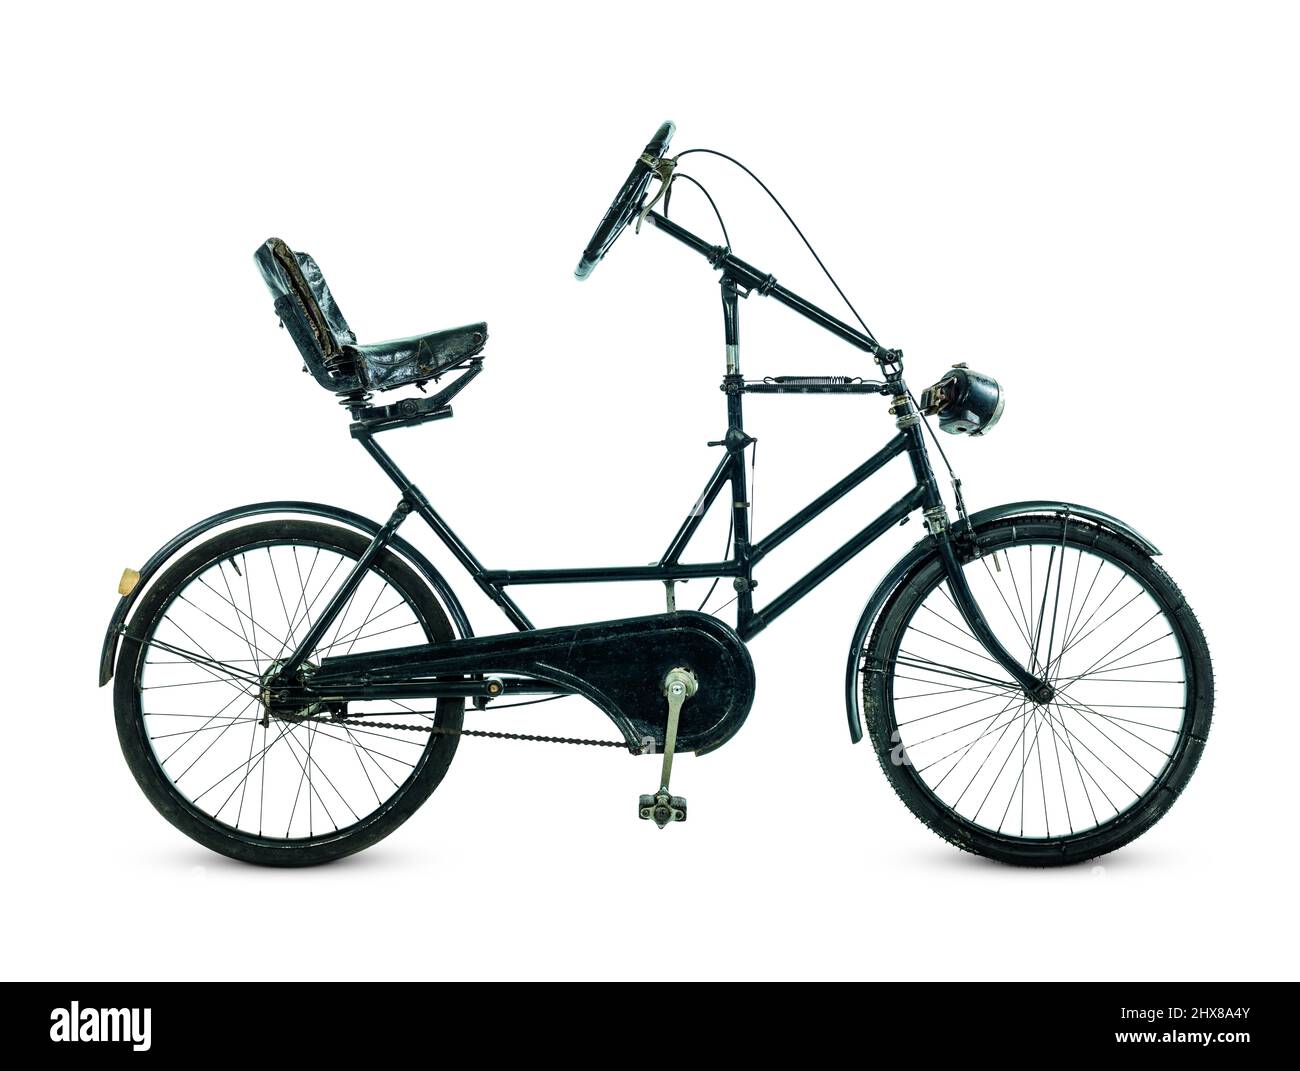 Triumph Moller Recumbent, 1935, UK, Side view. Rear-wheel steered. This is a semi-recumbent. Has steering wheel instead of handle bars. Stock Photo